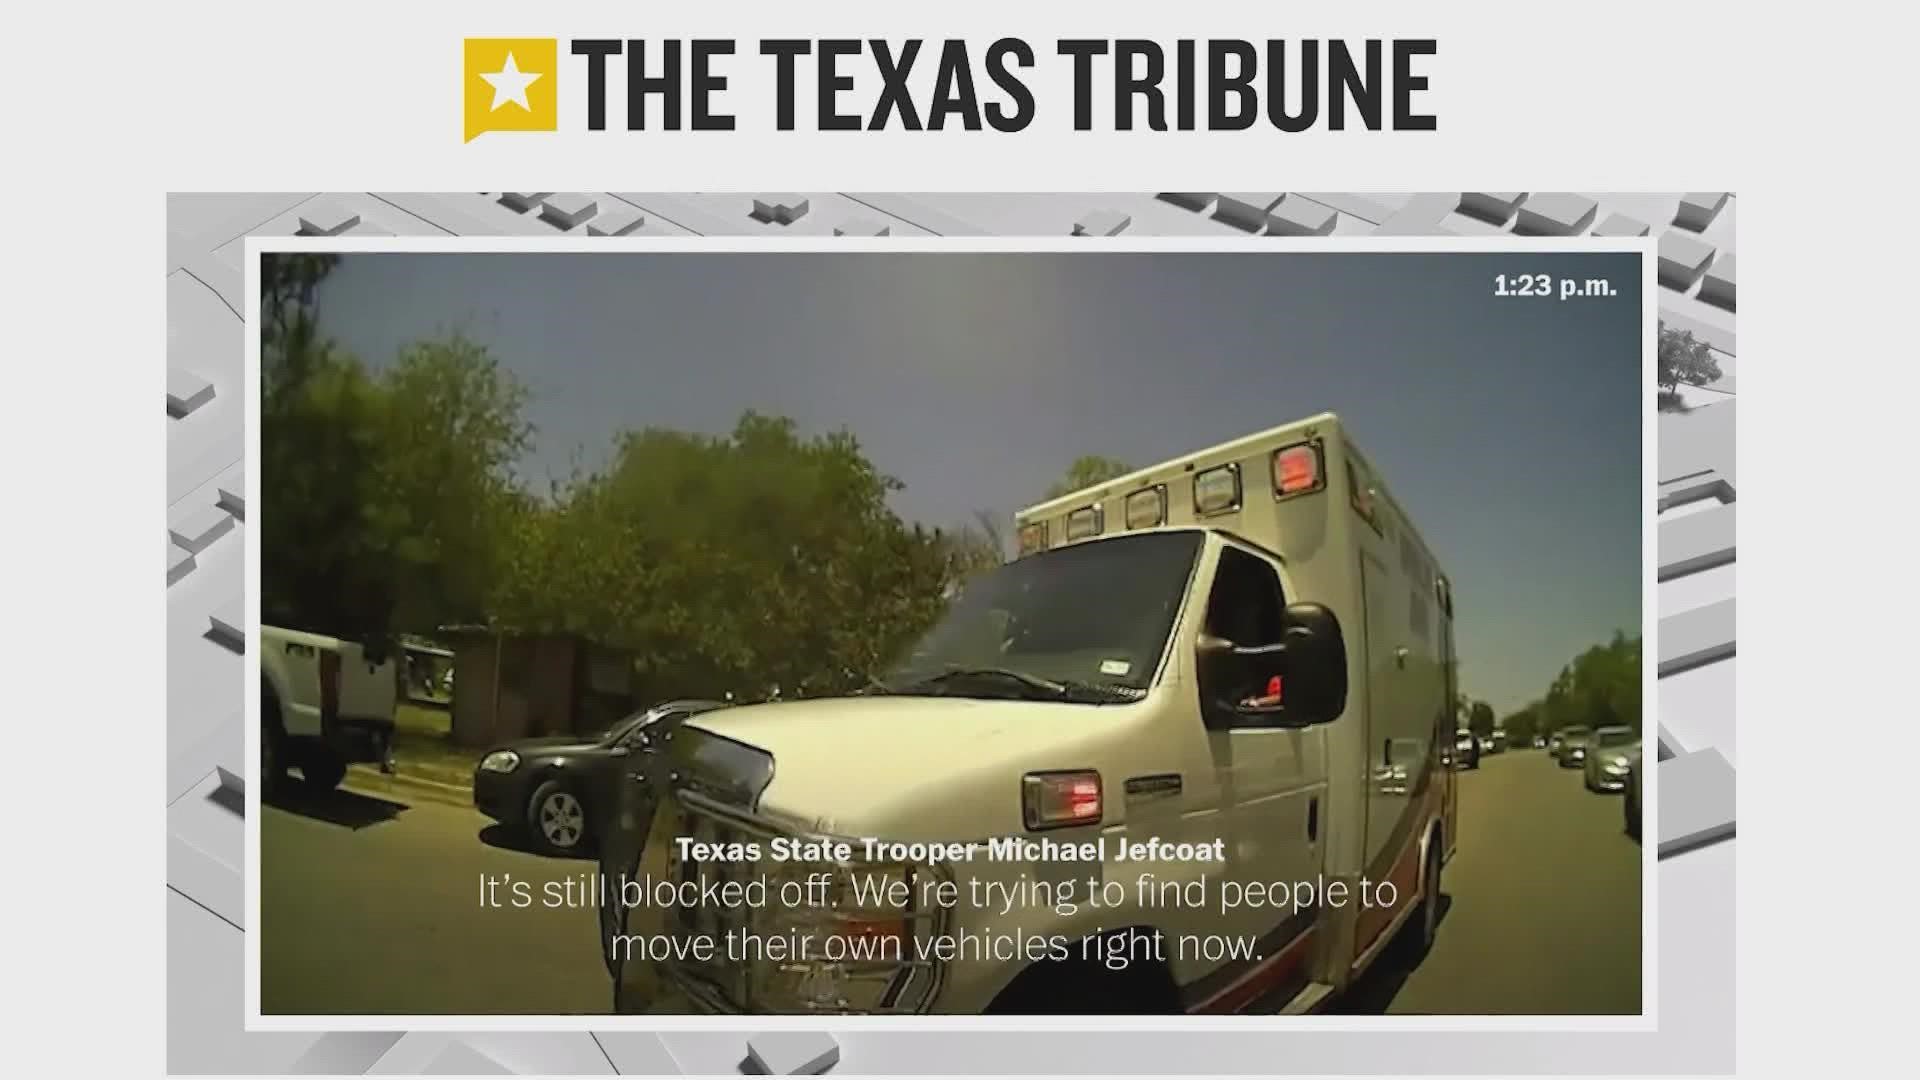 A joint investigation between The Texas Tribune, The Washington Post and ProPublica reveals issues that caused medical delays for some of the critically wounded.